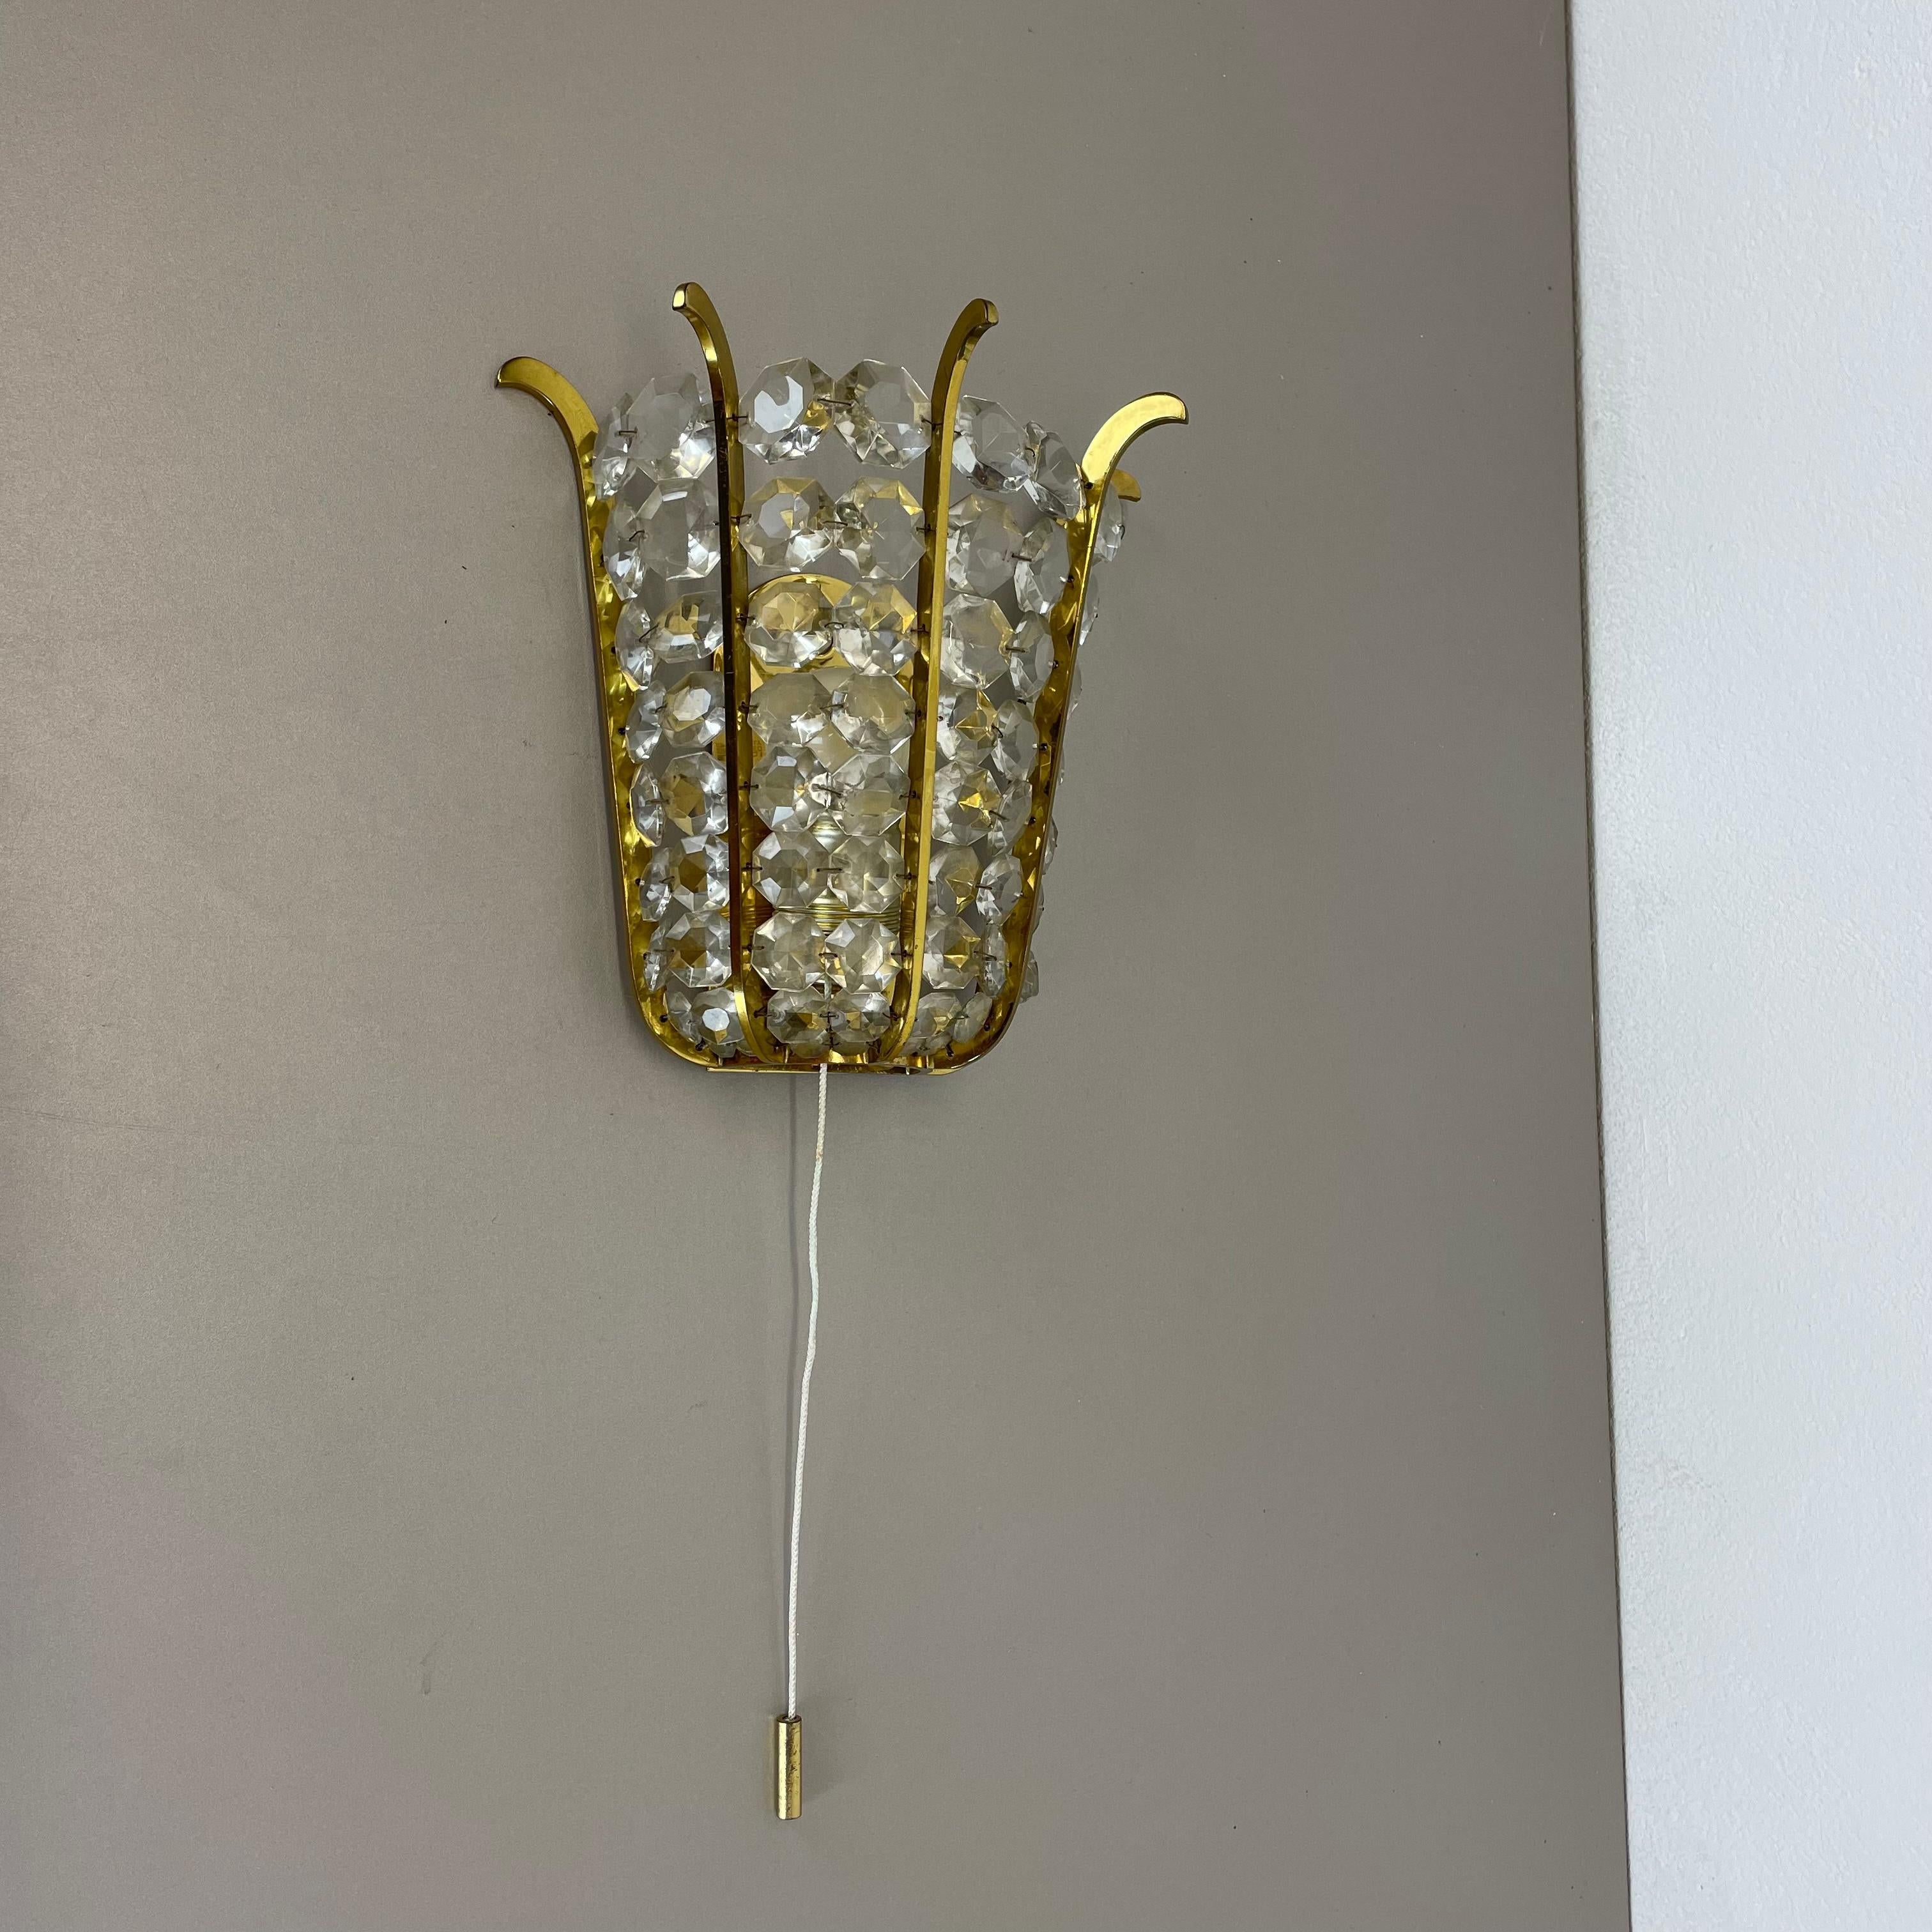 Article:

Wall light sconce


Producer:

Bakalowits, Austria



Origin:

Austria



Age:

1950s



Description:

Original 1970s modernist Vintage wall or made by Bakalowits in Vienna, Austria. this light has a floral